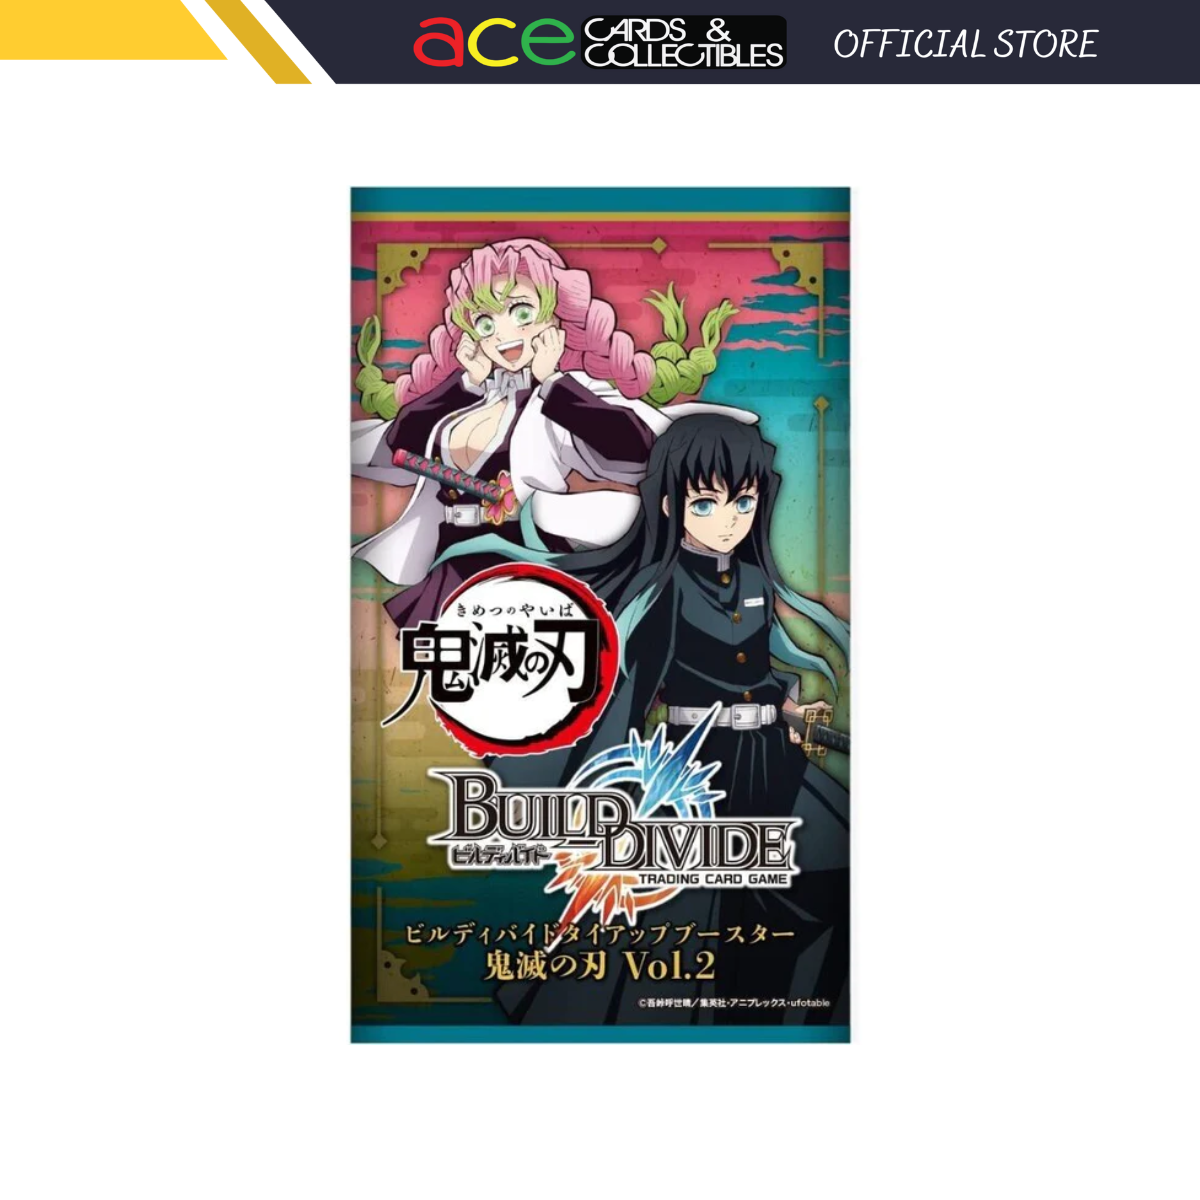 Build Divide Collaboration Booster "Demon Slayer: Kimetsu no Yaiba" Vol. 2 [BD-KM-TB2] (Japanese)-Booster Pack-Aniplex-Ace Cards & Collectibles